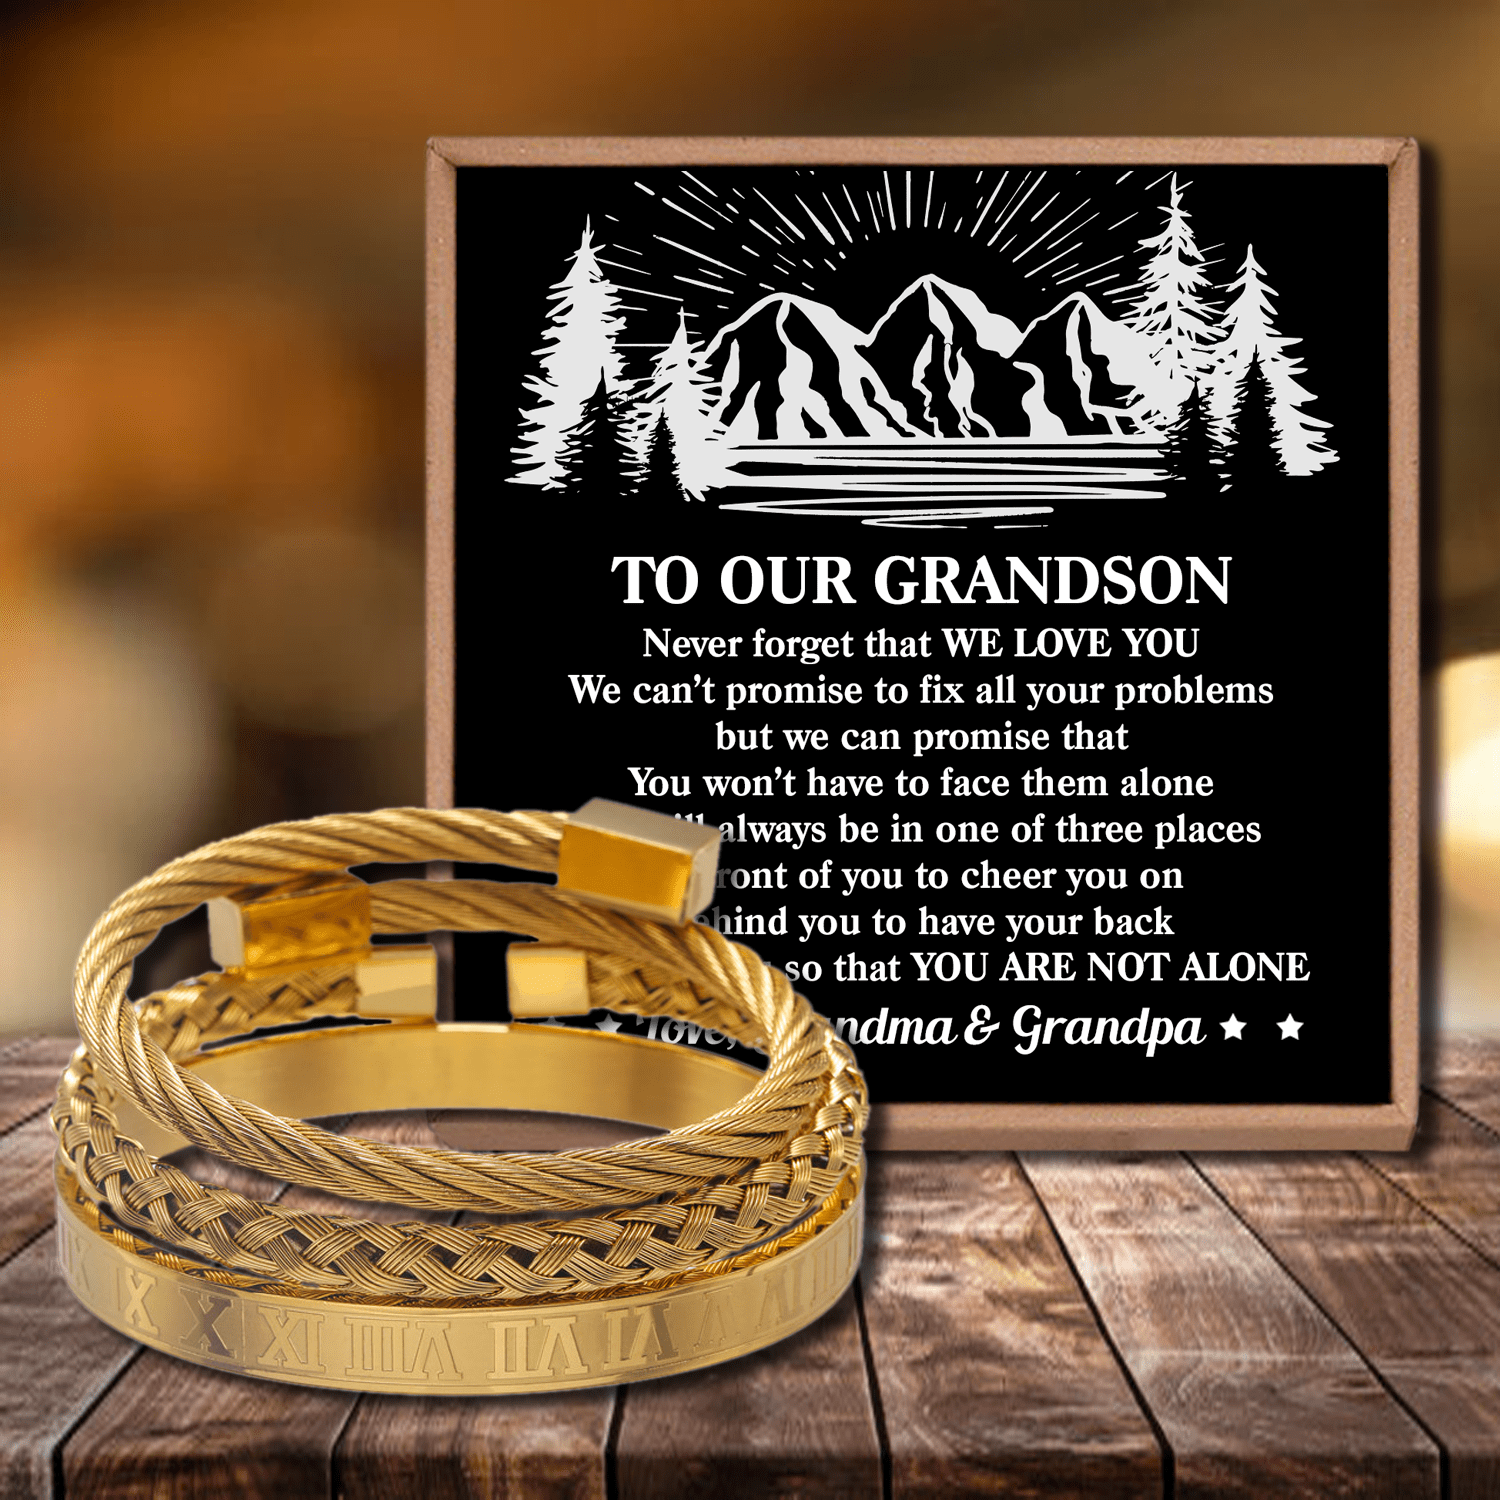 Bracelets To Our Grandson - You Are Not Alone Roman Numeral Bracelet Set Gold GiveMe-Gifts